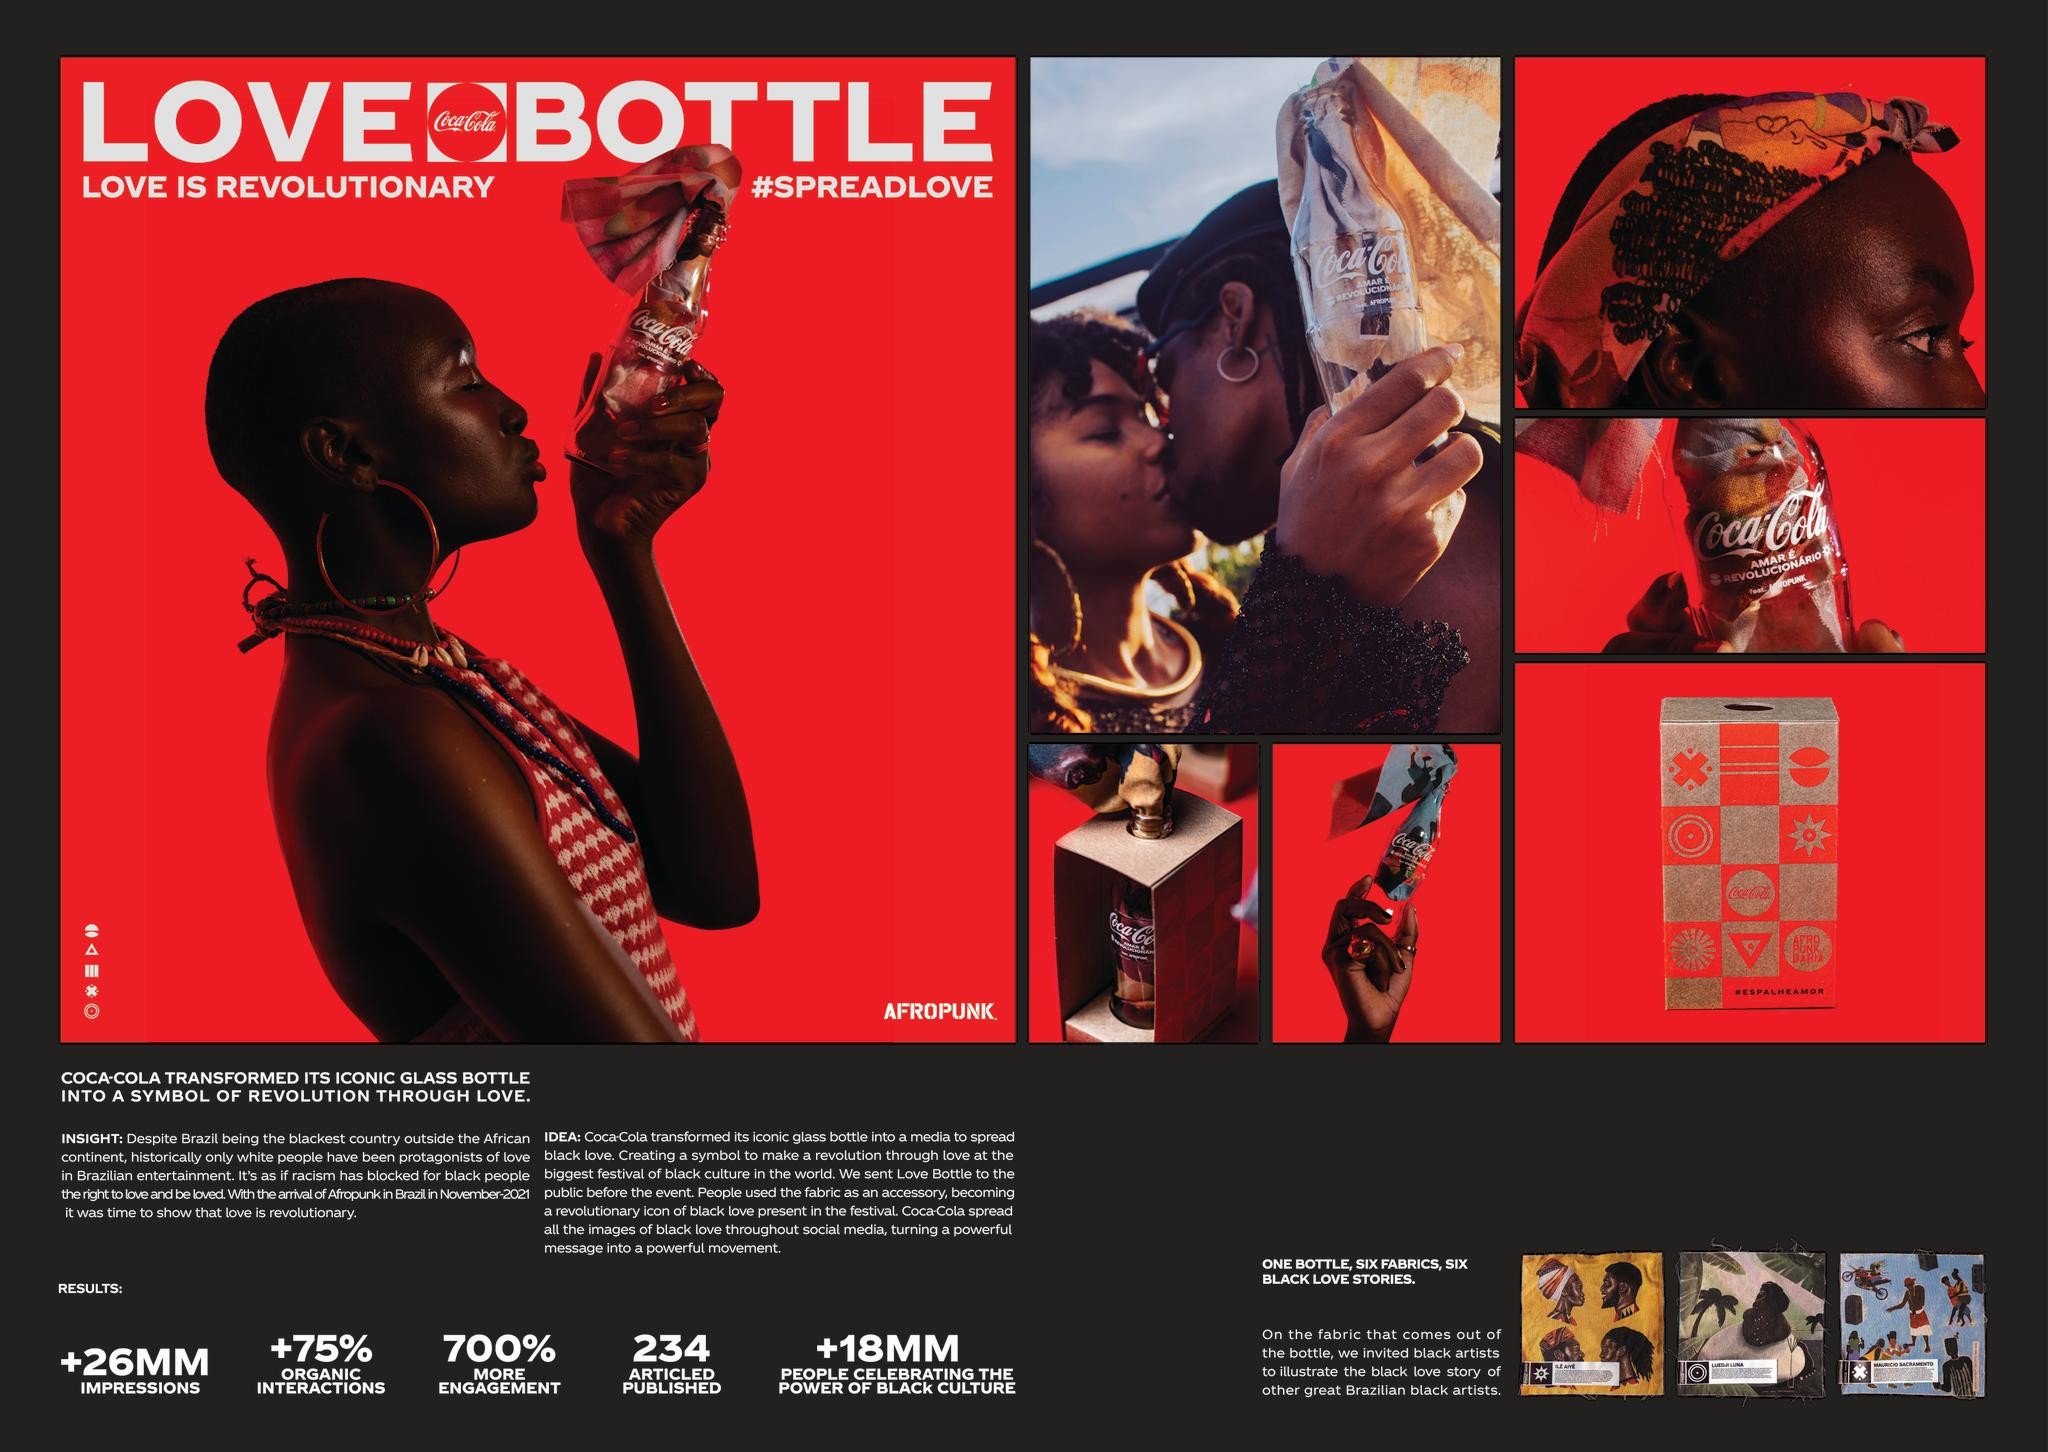 Love Bottle by Coca-Cola